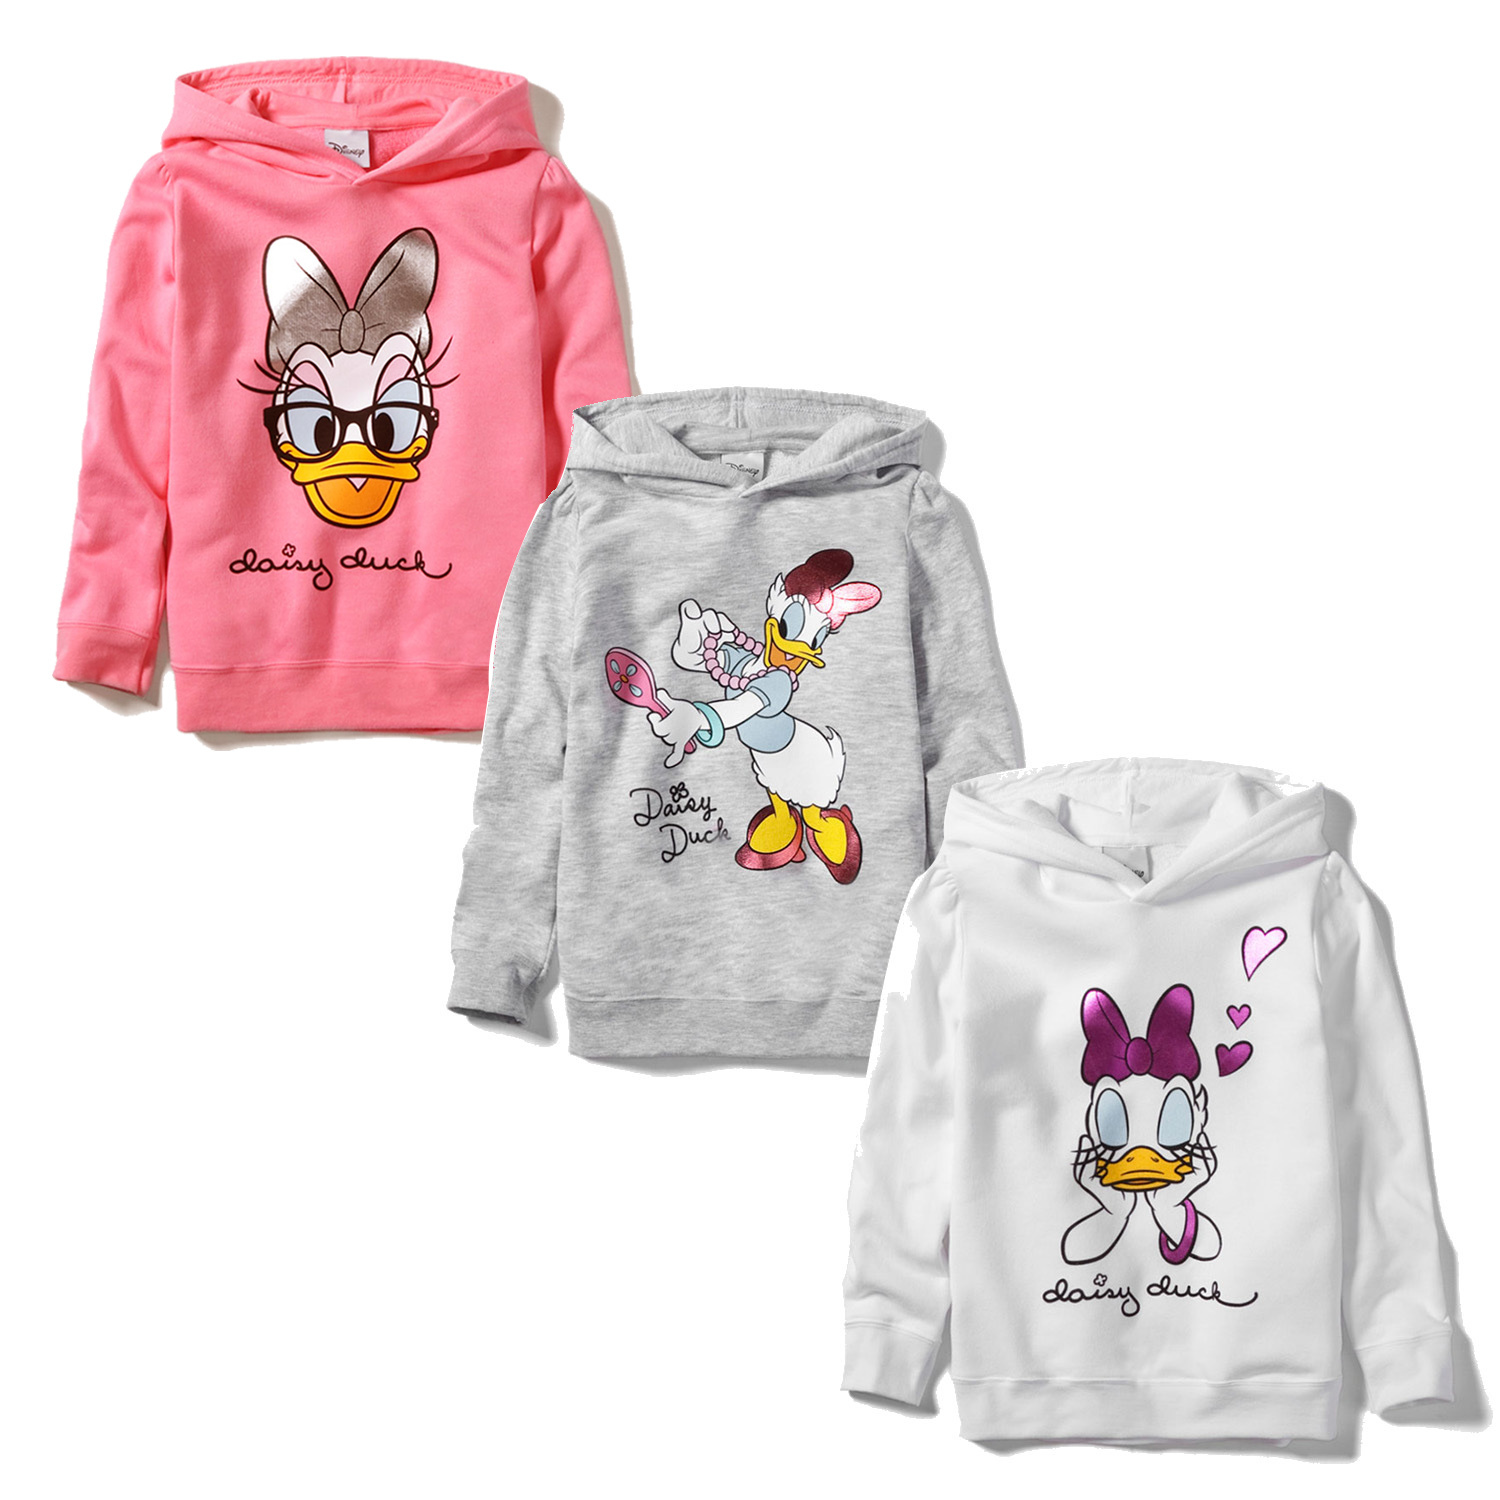 2012 spring and autumn donald duck clothing Women hoody child female child sweatshirt outerwear